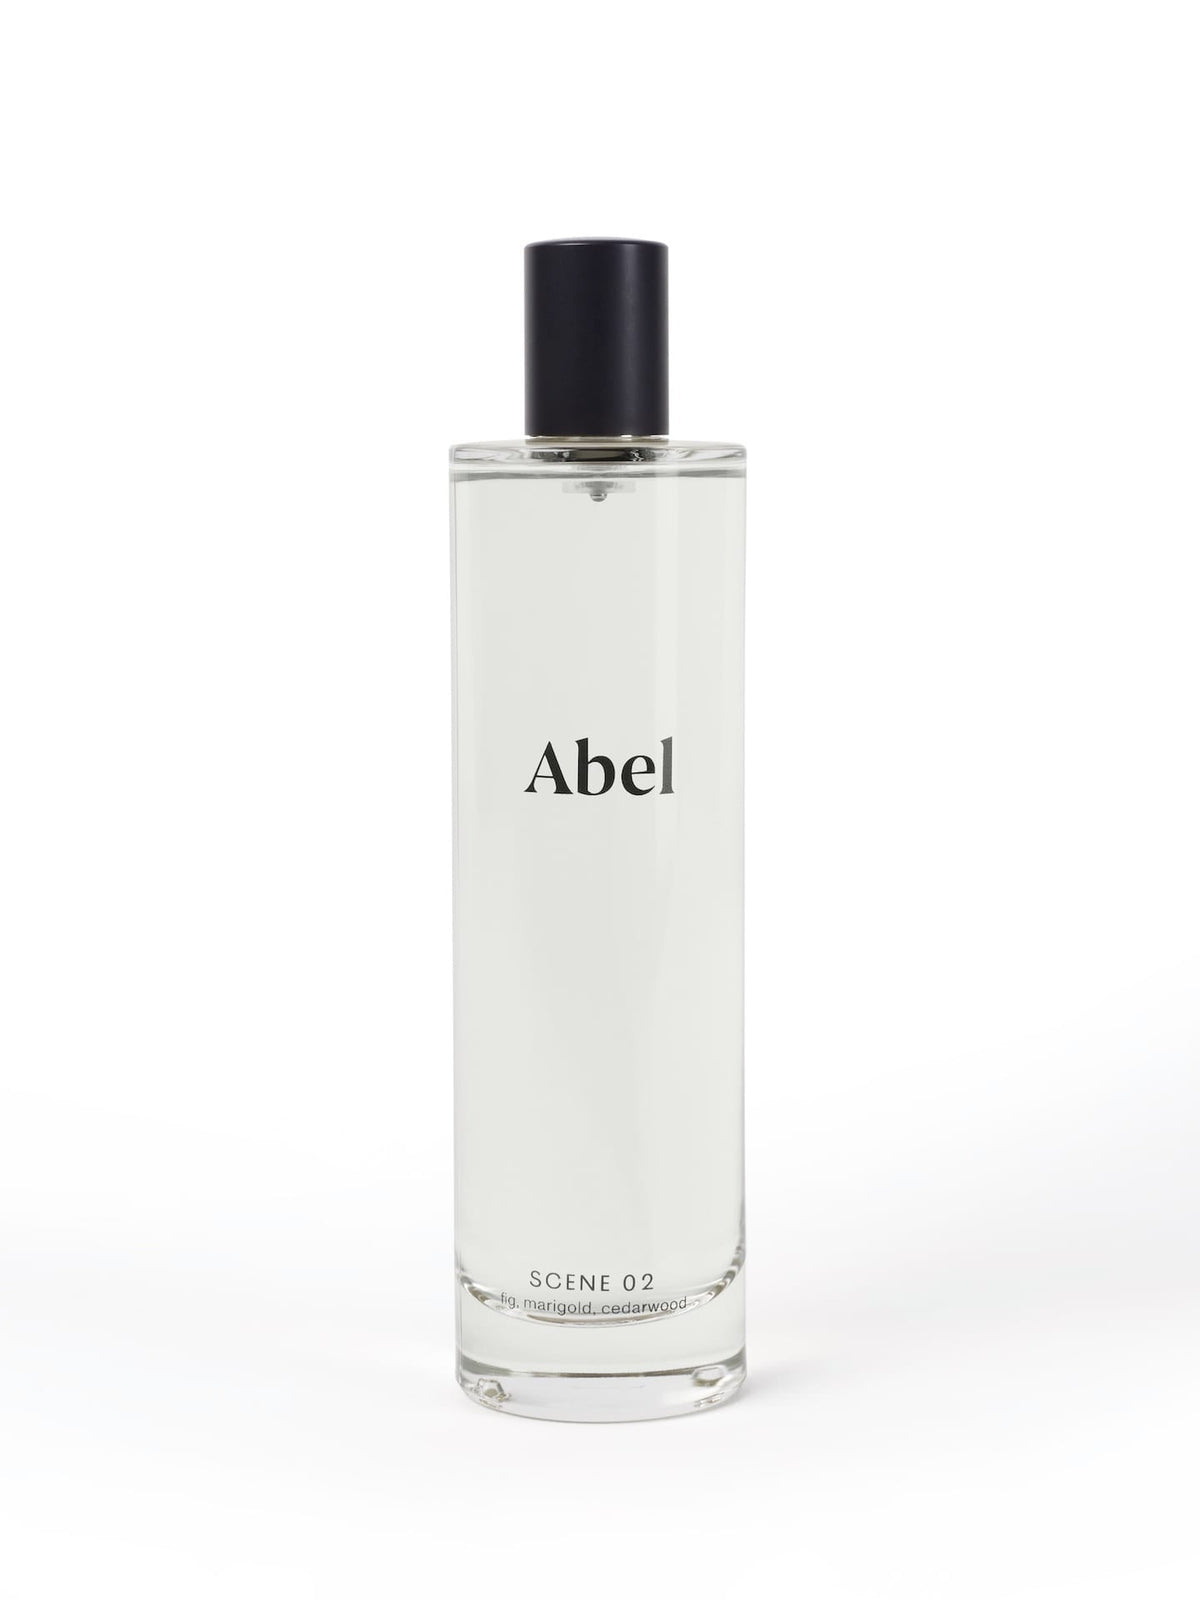 A transparent bottle of Abel Room Spray – Scene 02 ⋅ fig, marigold, cedarwood with a black cap against a white background.